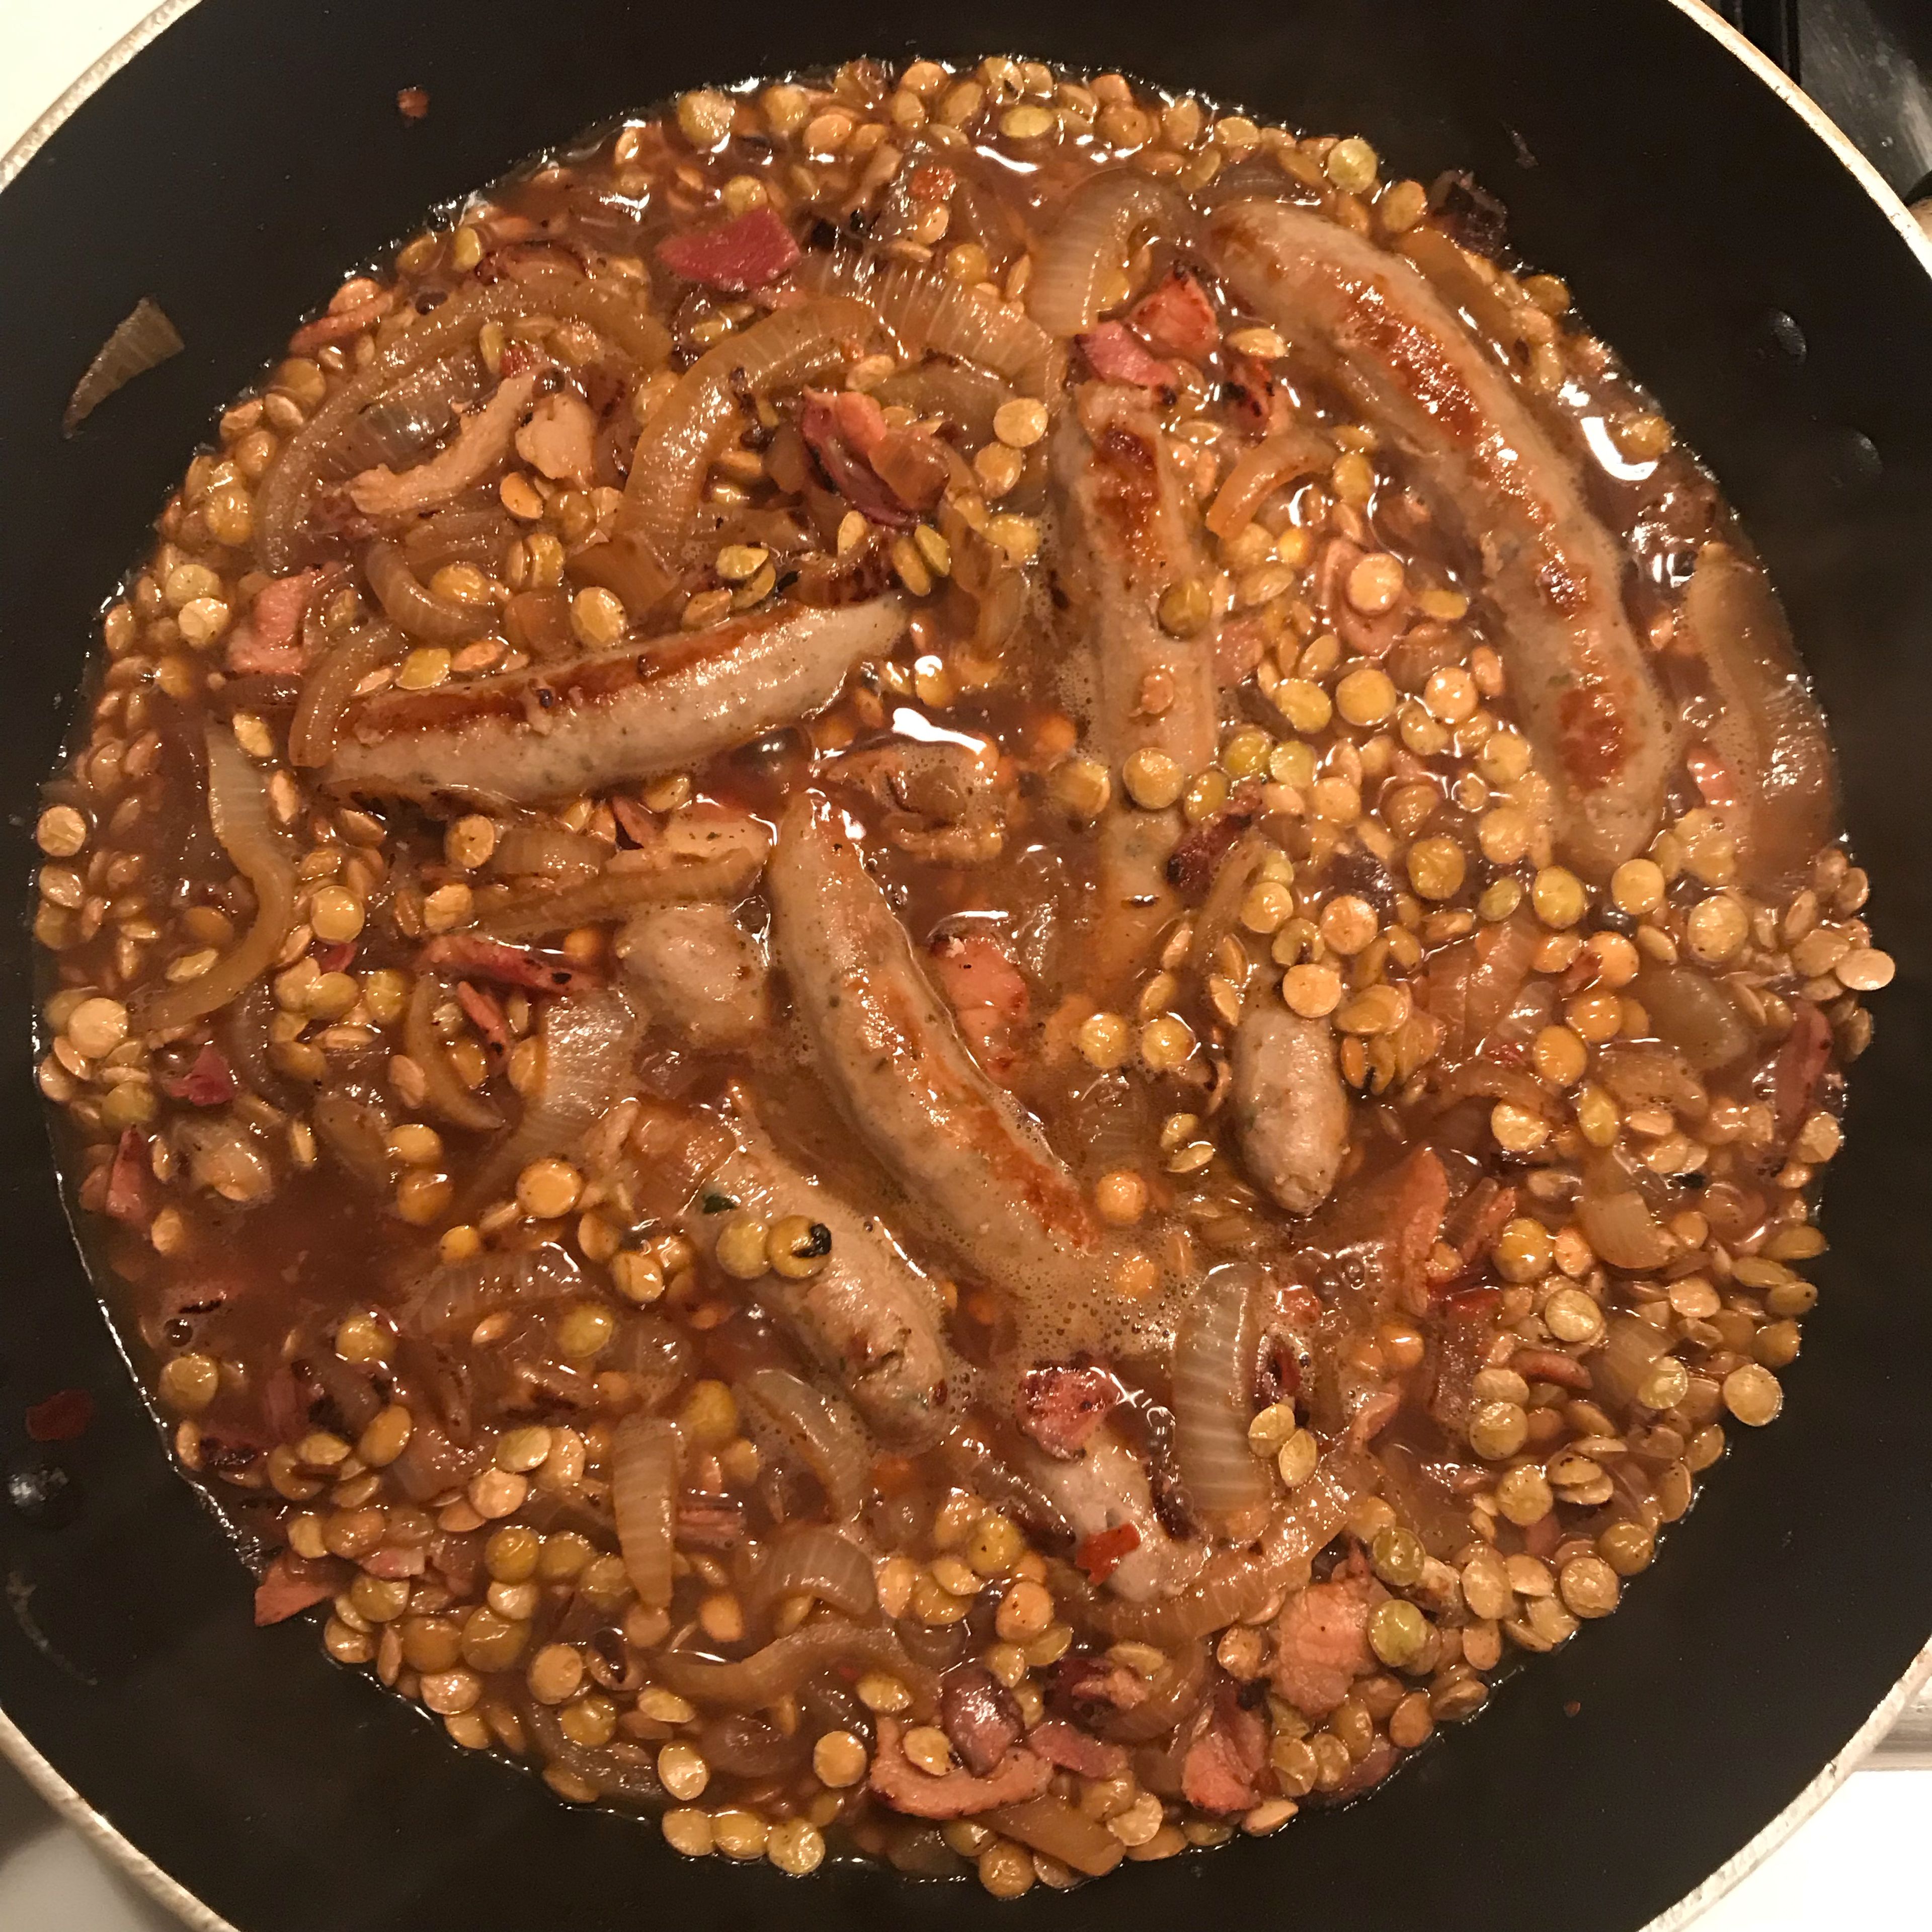 Season, turn down to simmer and put sausages back. Don’t let the lentils get too soft - keep testing them. The stock and wine should get absorbed by the lentils. Add more if needed. 